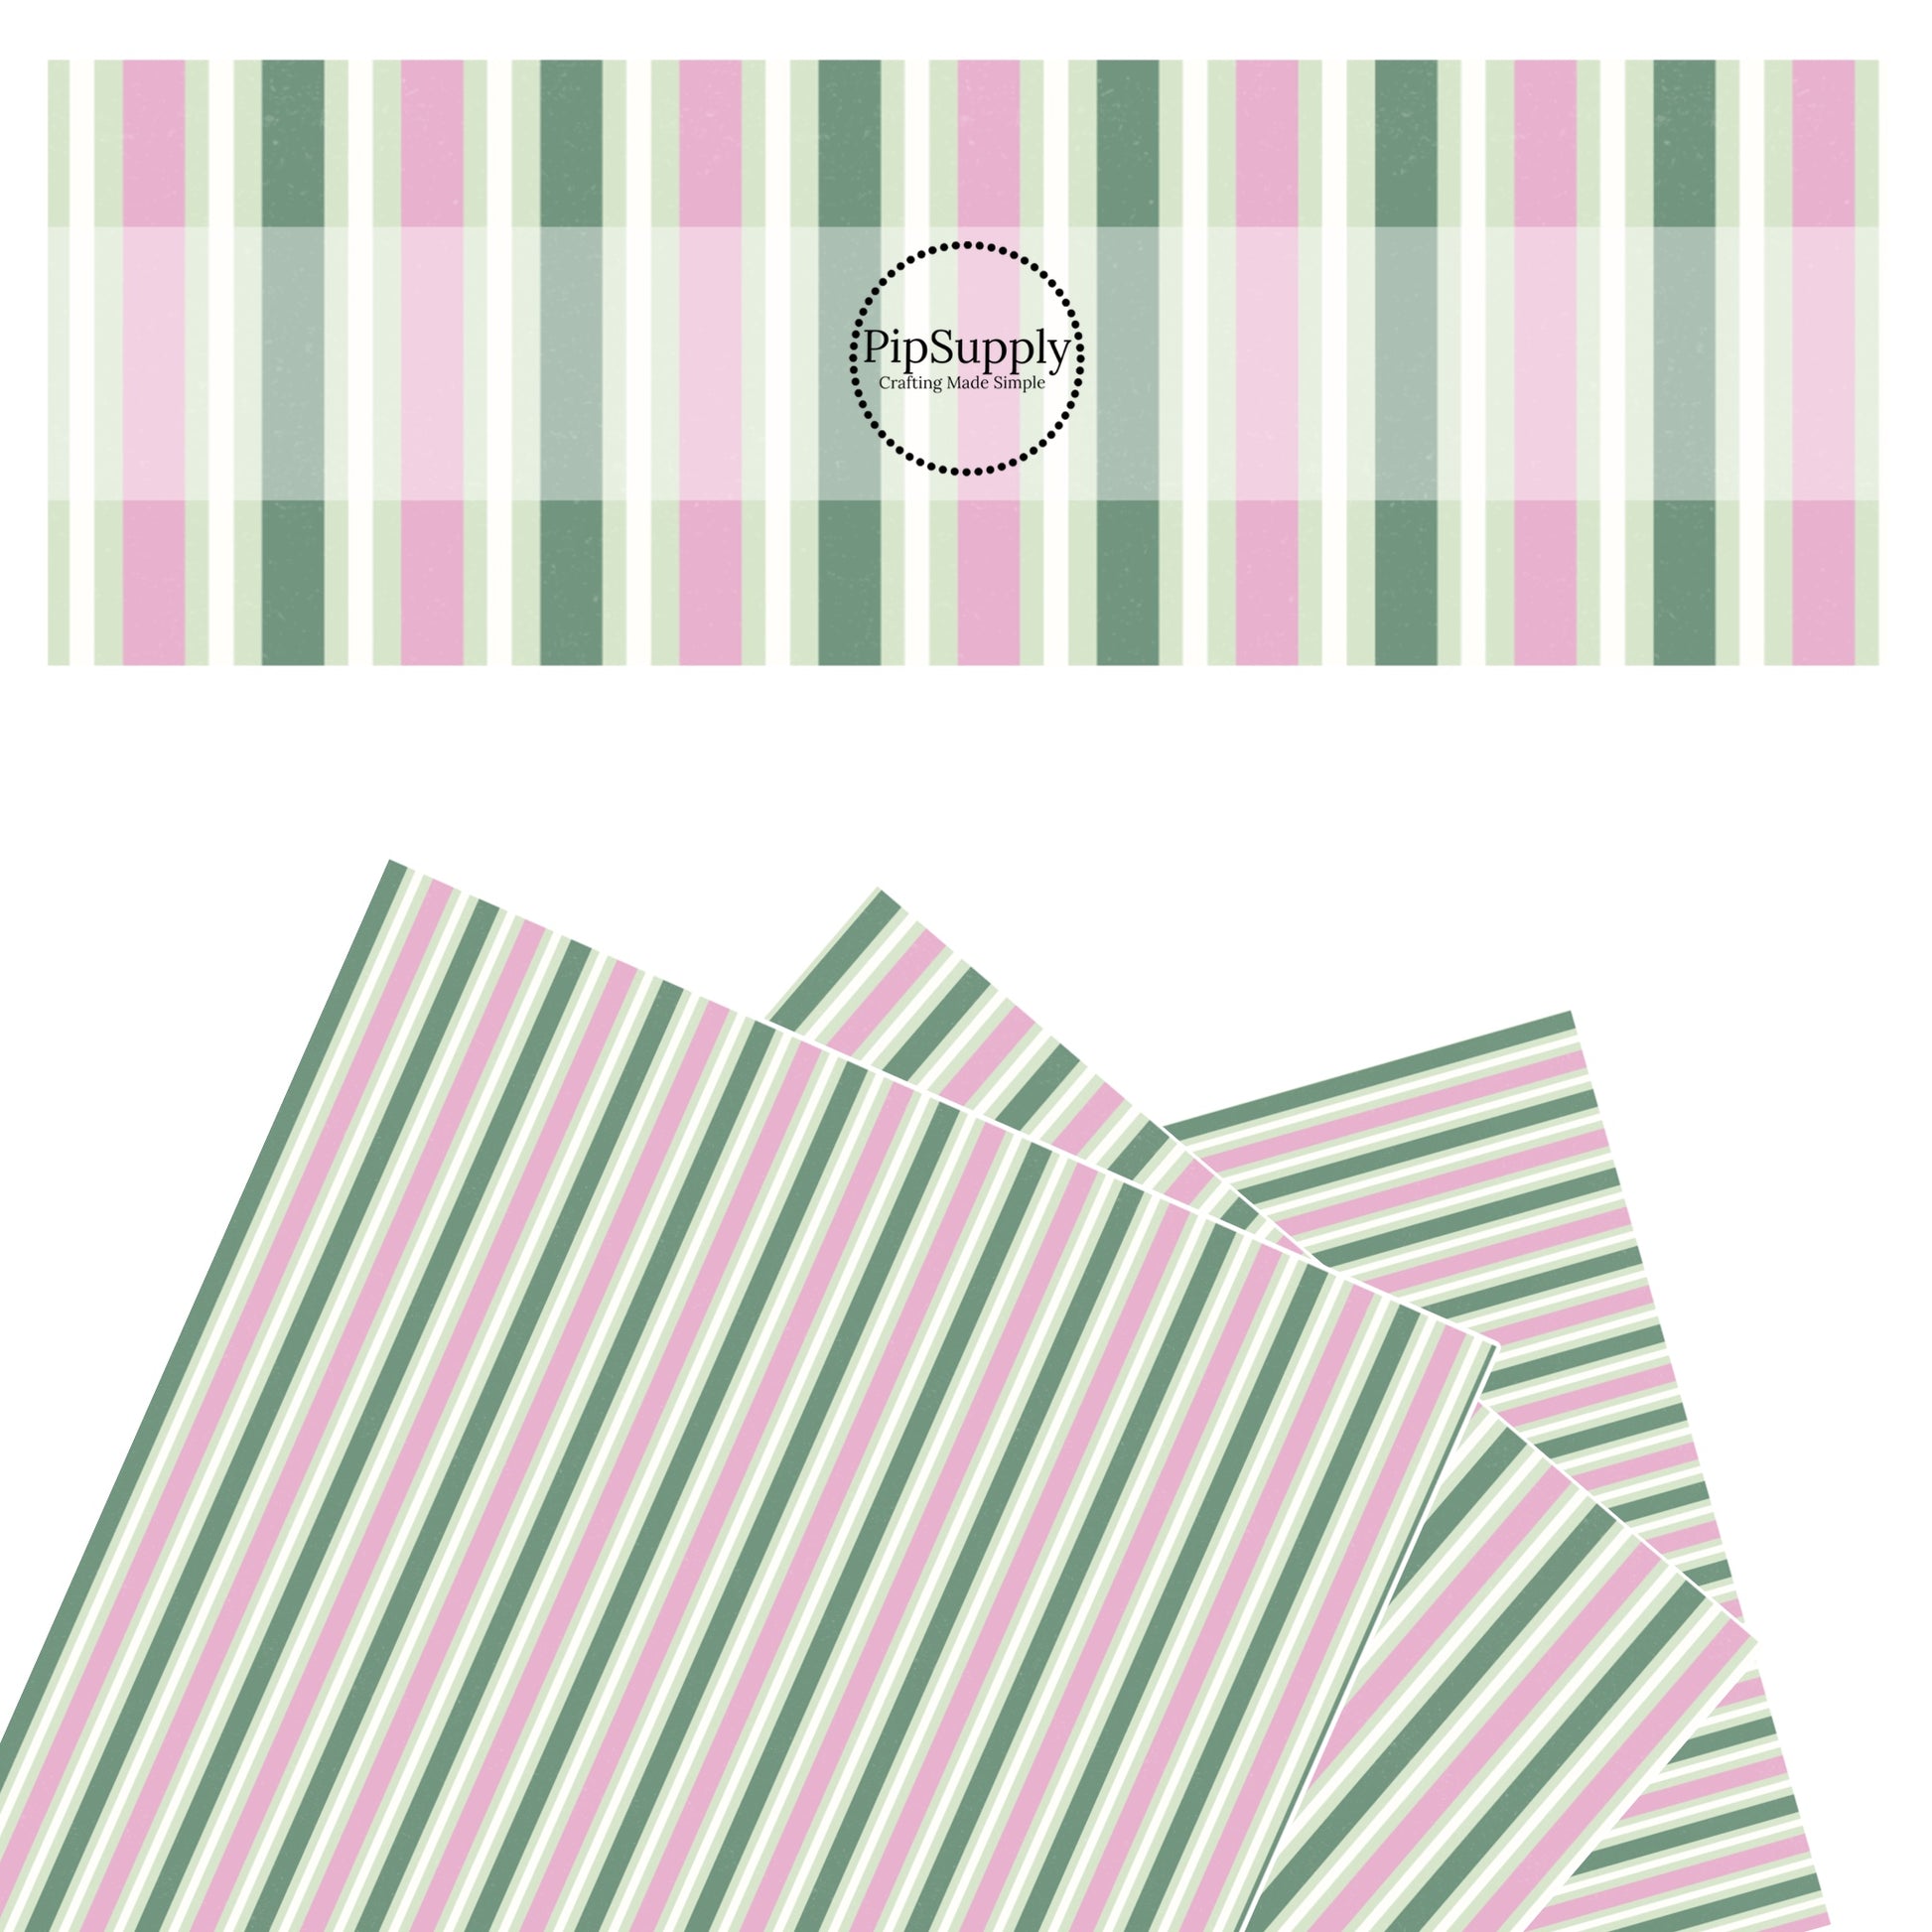 These St. Patrick's Day pattern themed faux leather sheets contain the following design elements: pink, cream, light green, and dark green stripes. Our CPSIA compliant faux leather sheets or rolls can be used for all types of crafting projects.